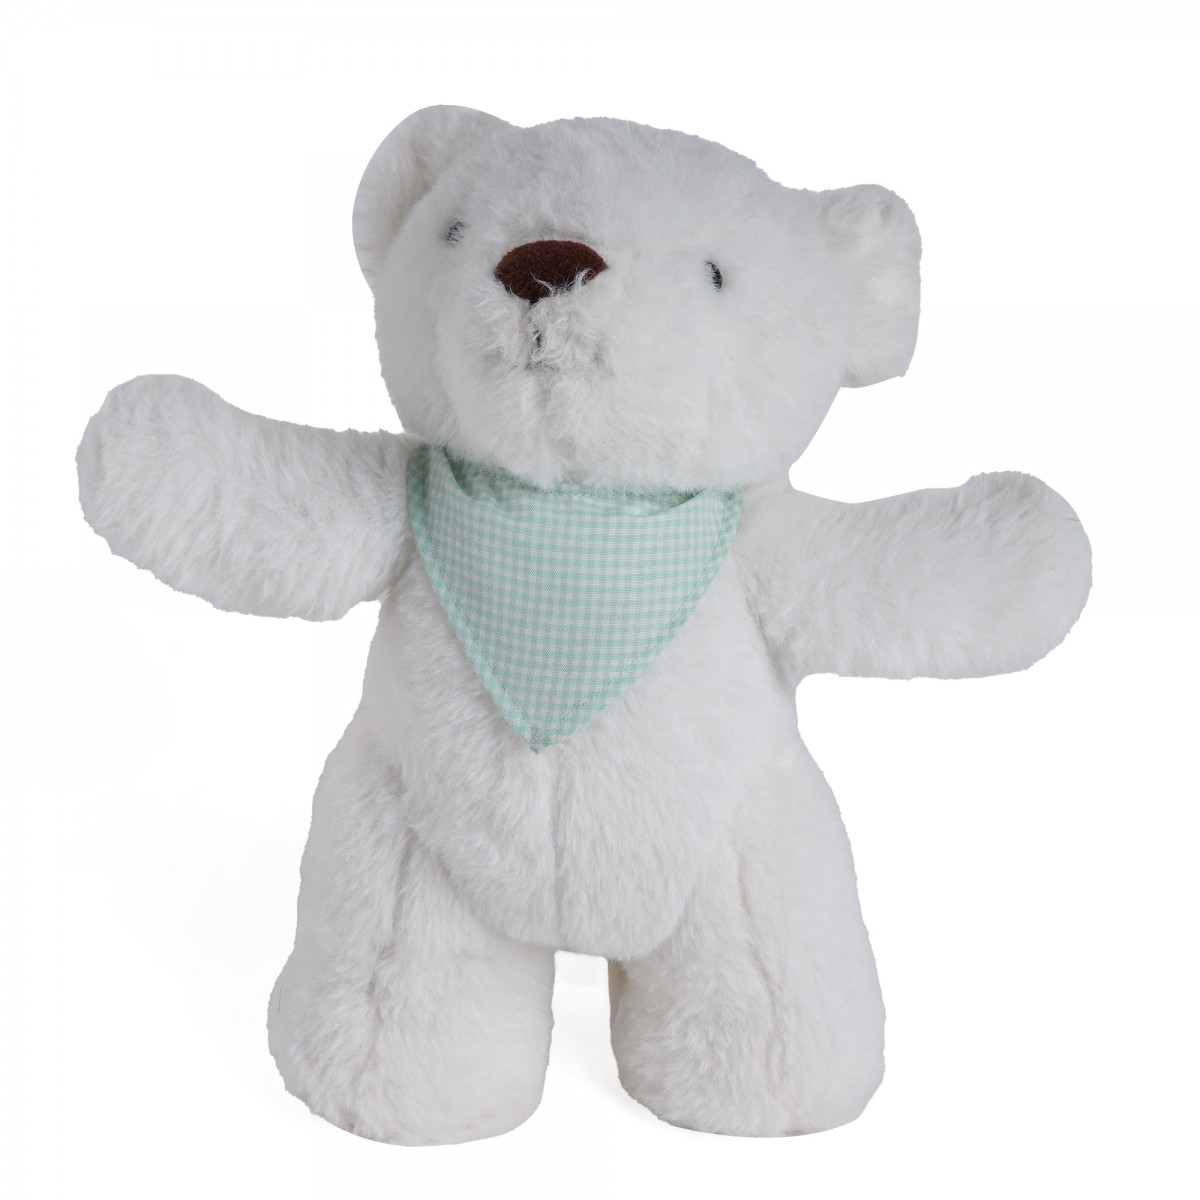 Huggable Cuddly Standing Bear Stuffed Toy By Fuzzbuzz, Soft Toys for Kids, Cute Plushies White, For Kids Of Age 2 Years & Above